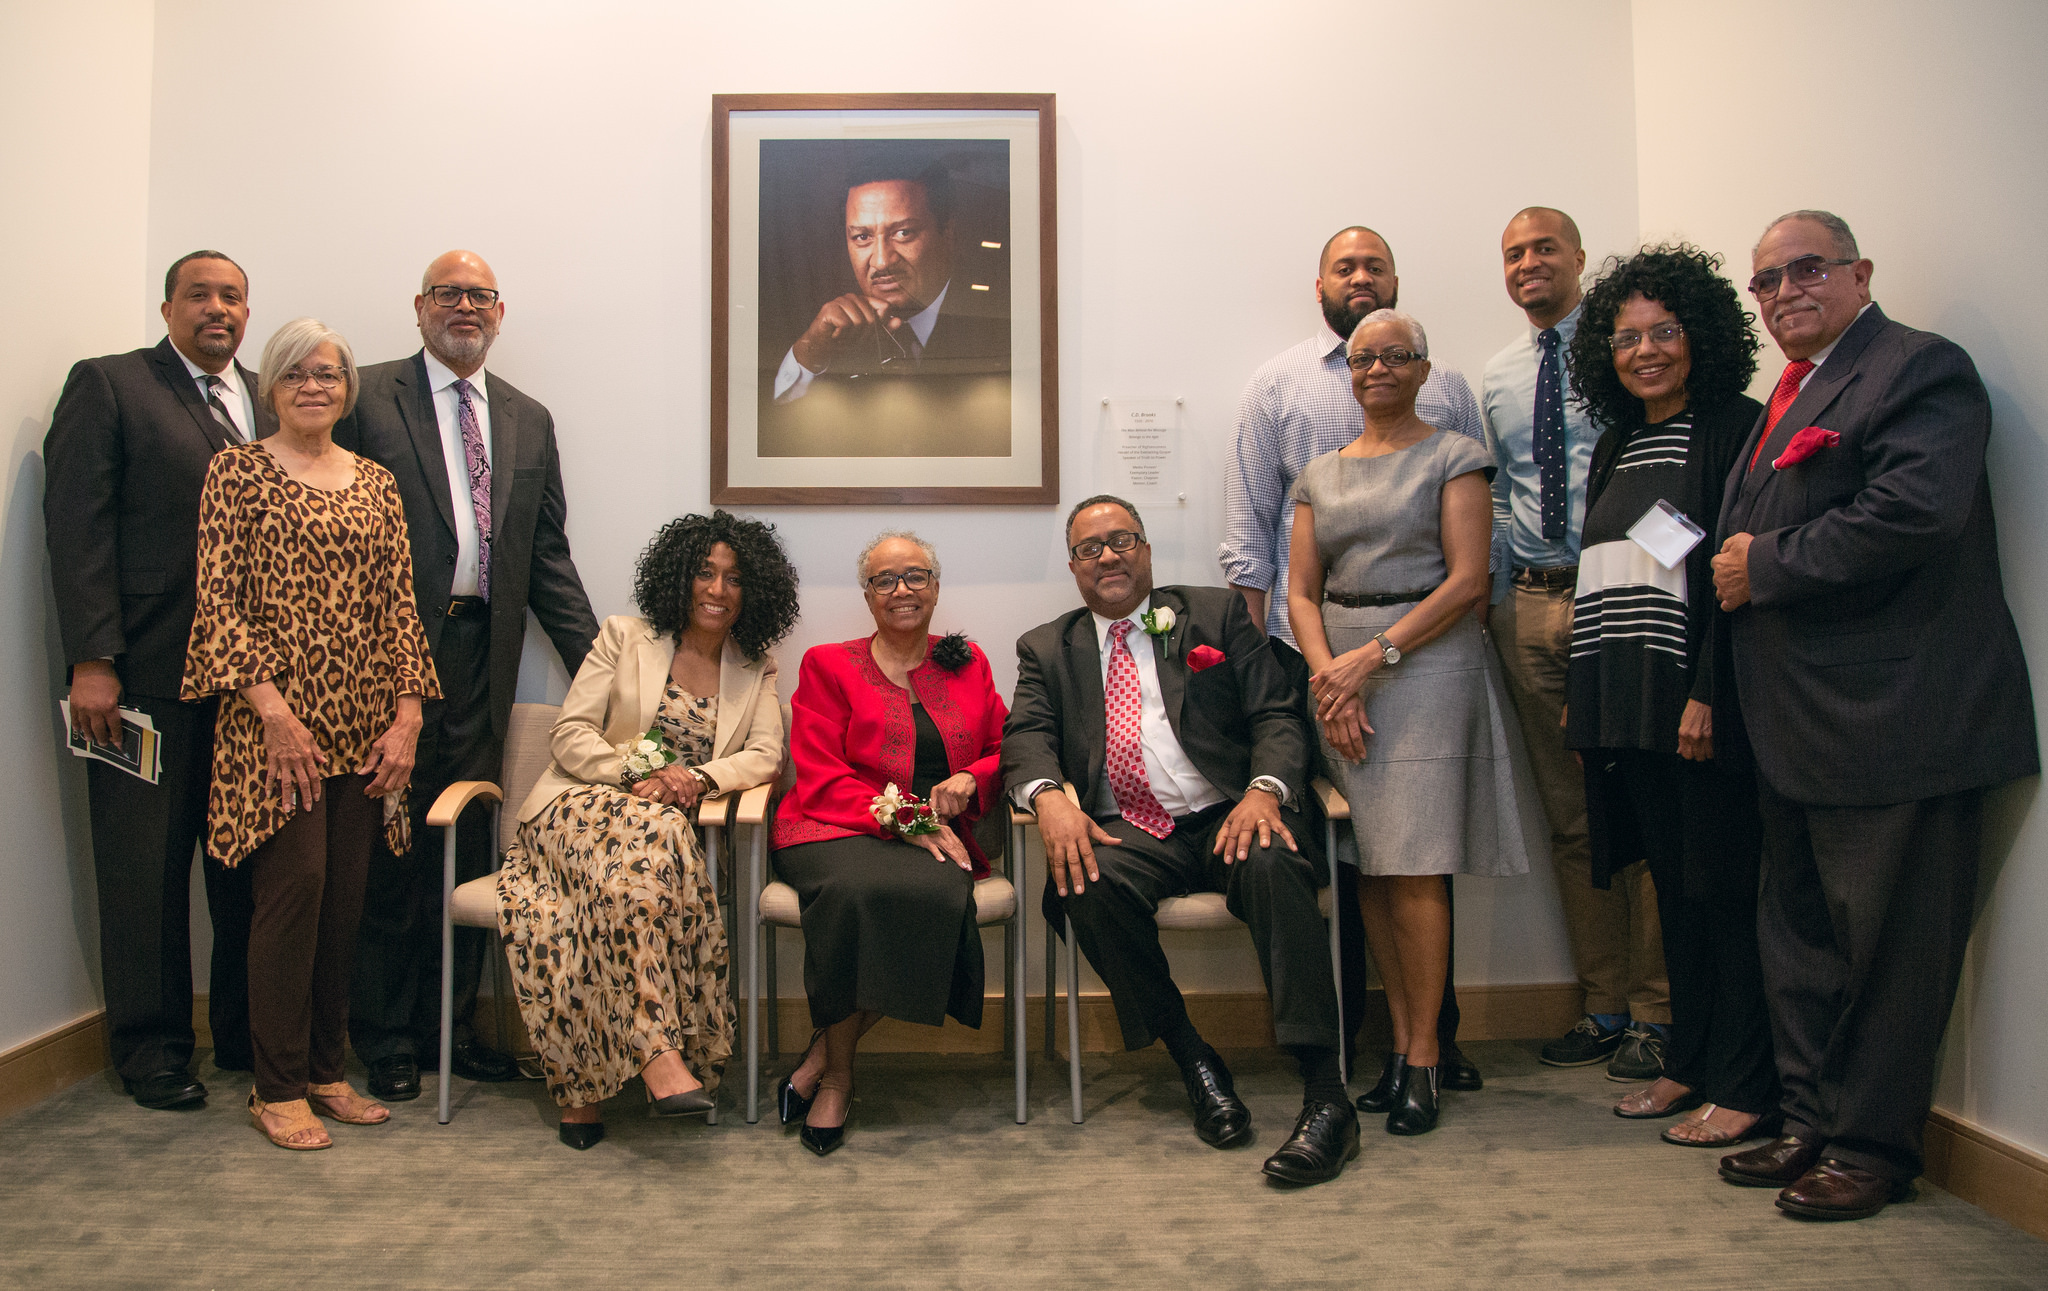 Members of the Brooks family pose under portrait of C.D. Brooks in the division headquarter's prayer chapel. 